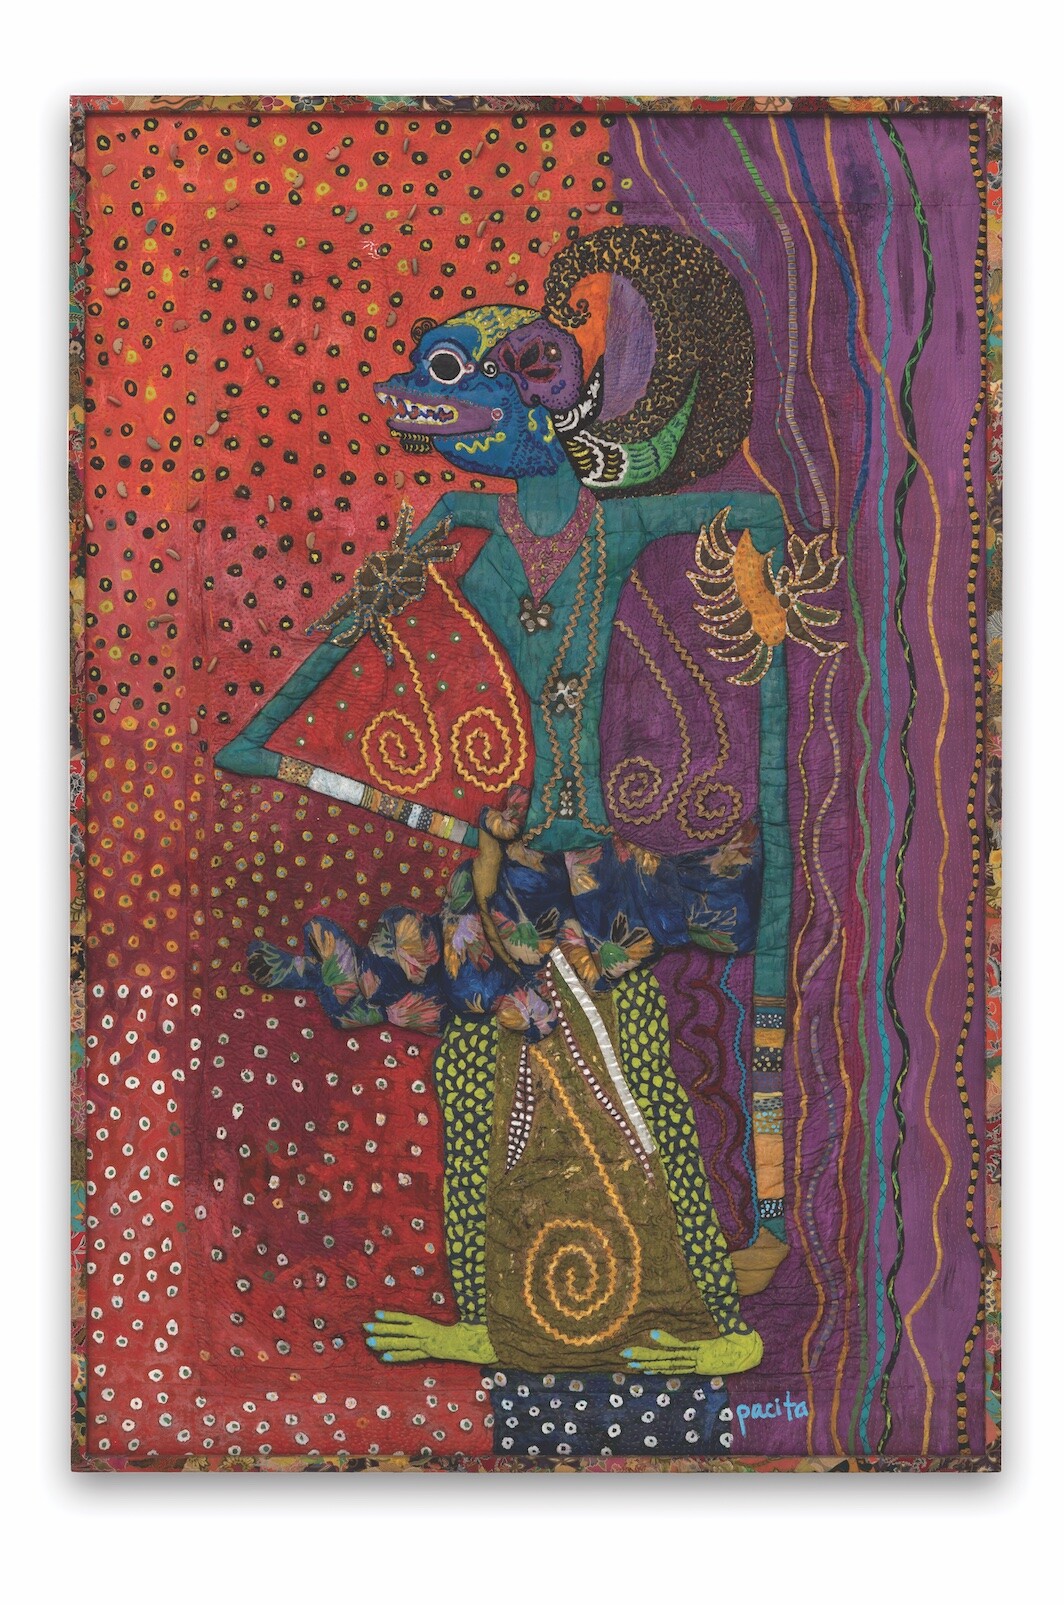 Pacita Abad, Subali, 1983/90, acrylic, oil, gold cotton, batik cloth, sequins, rickrack ribbons on stitched and padded canvas. Courtesy Pacita Abad Art Estate, photo: Rik Sferra for Walker Art Center.